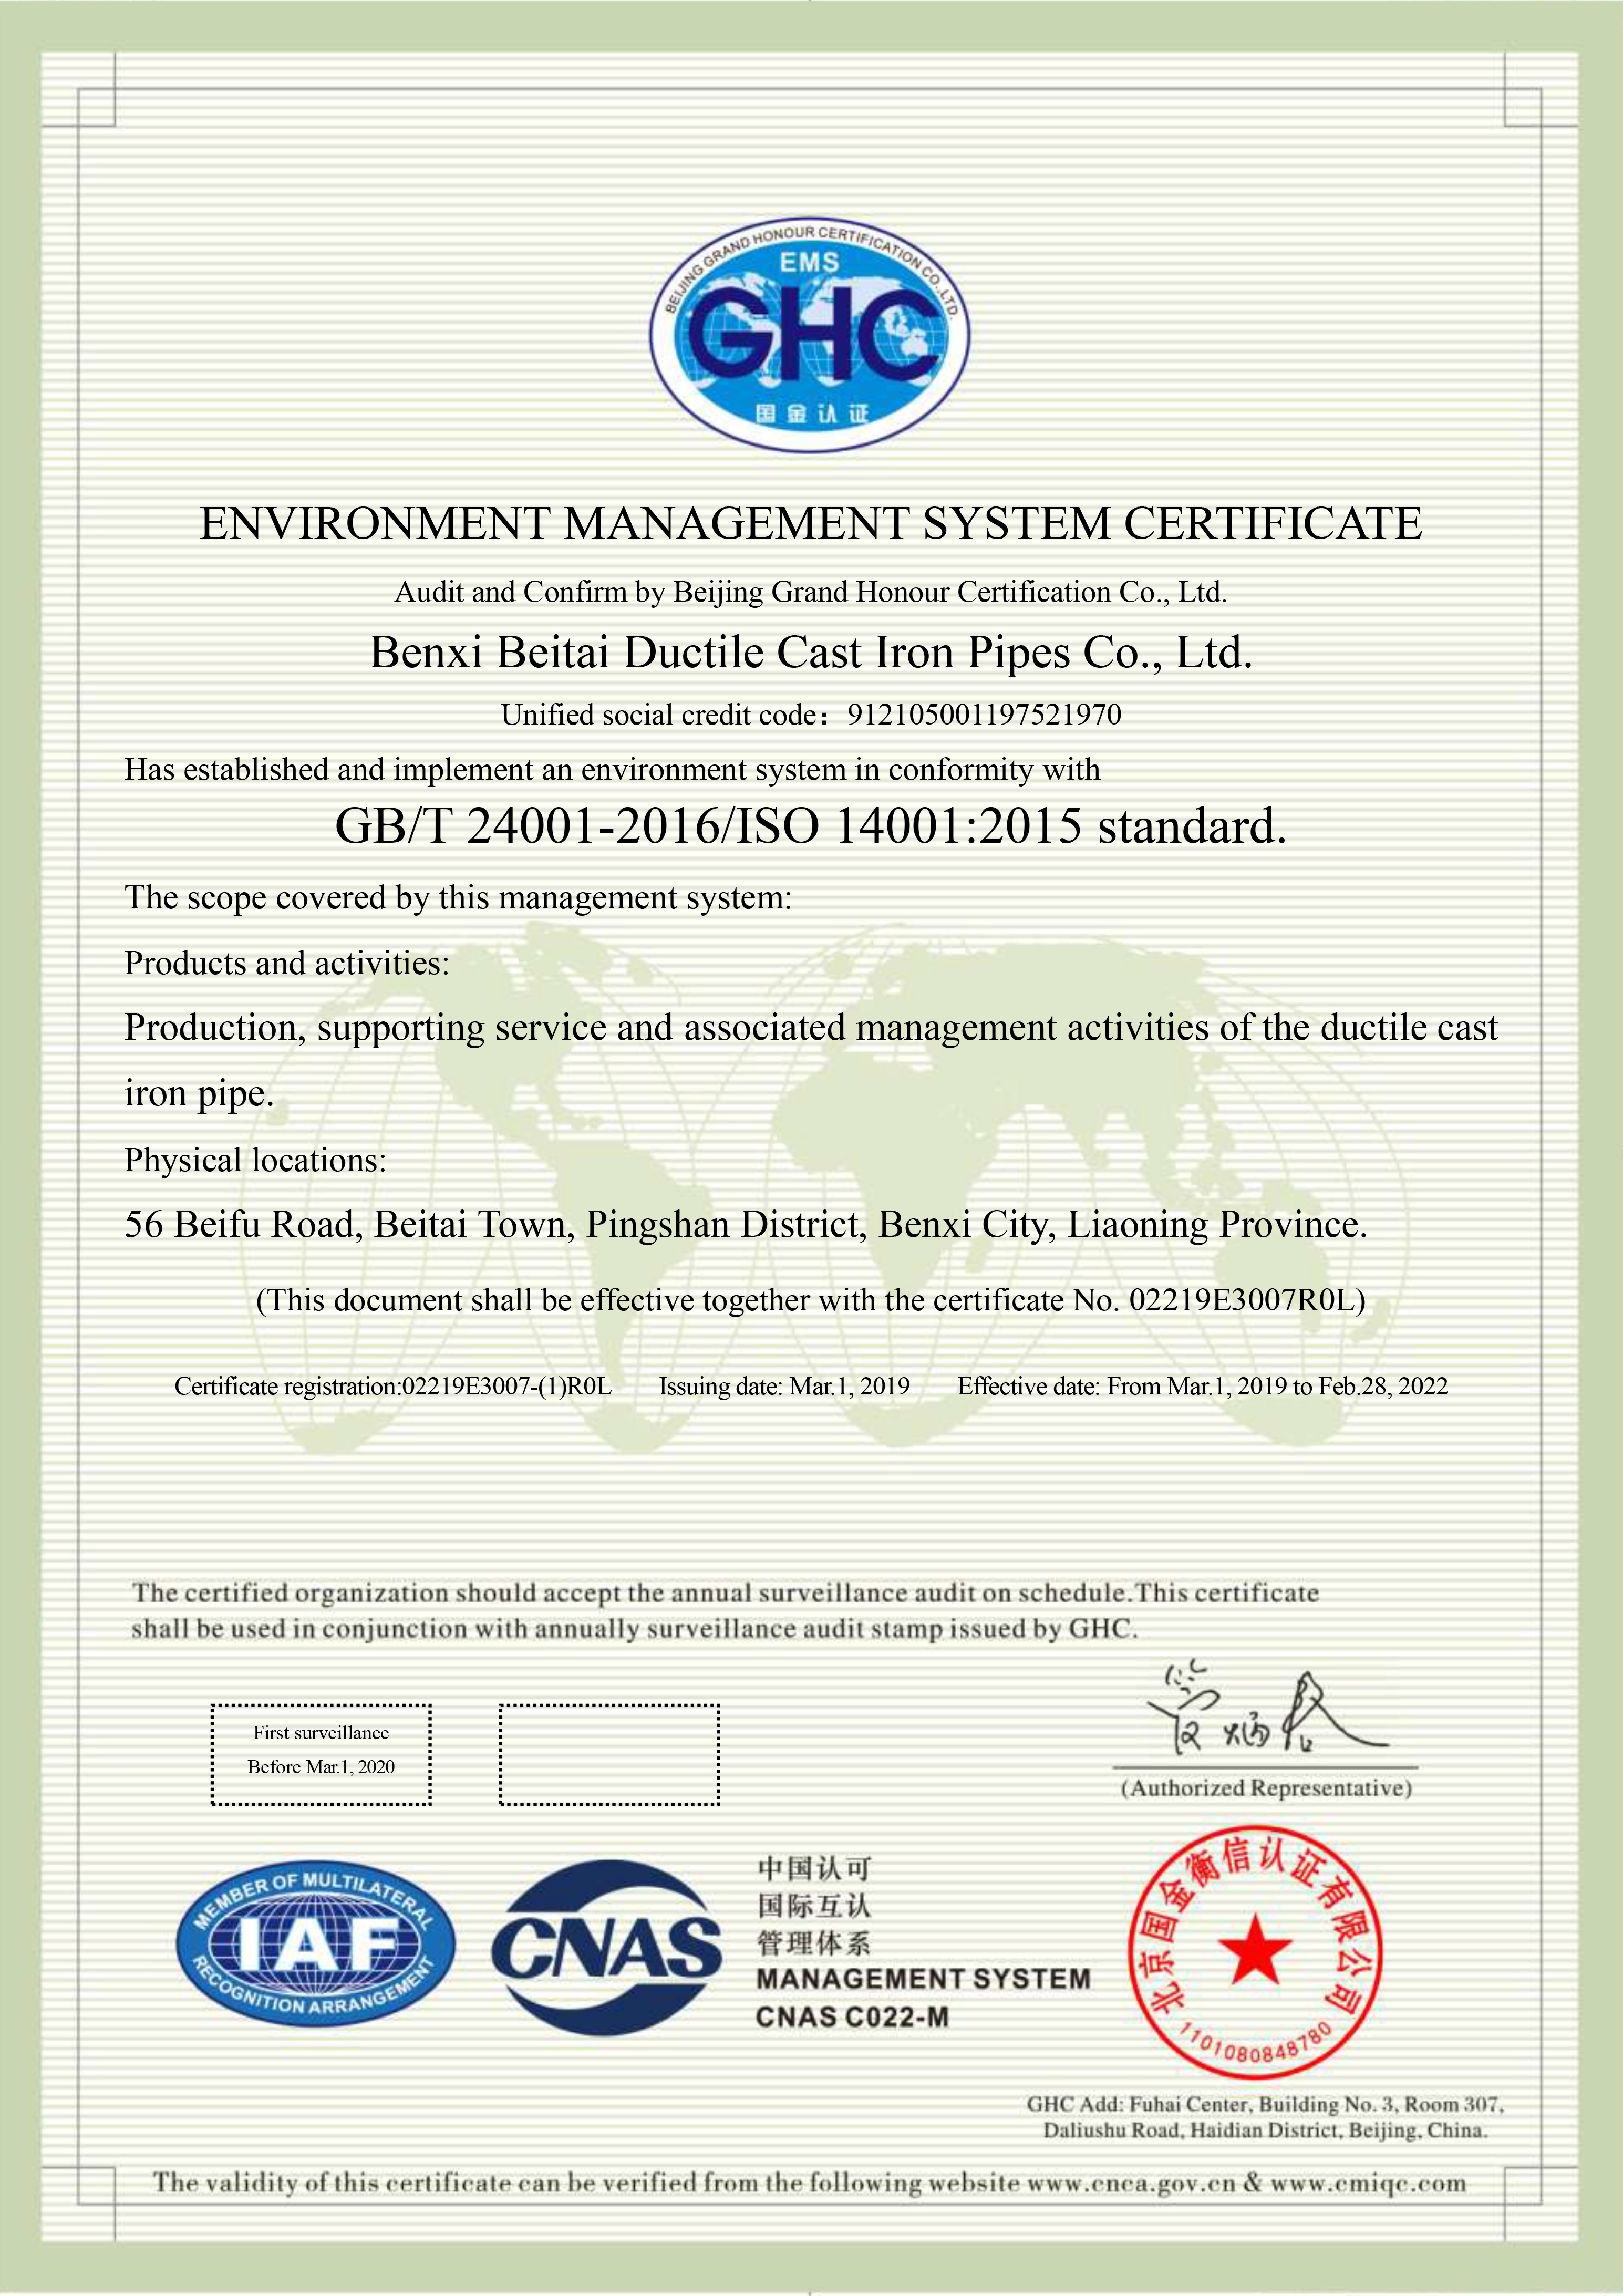 ISO14001-2015 Certificate